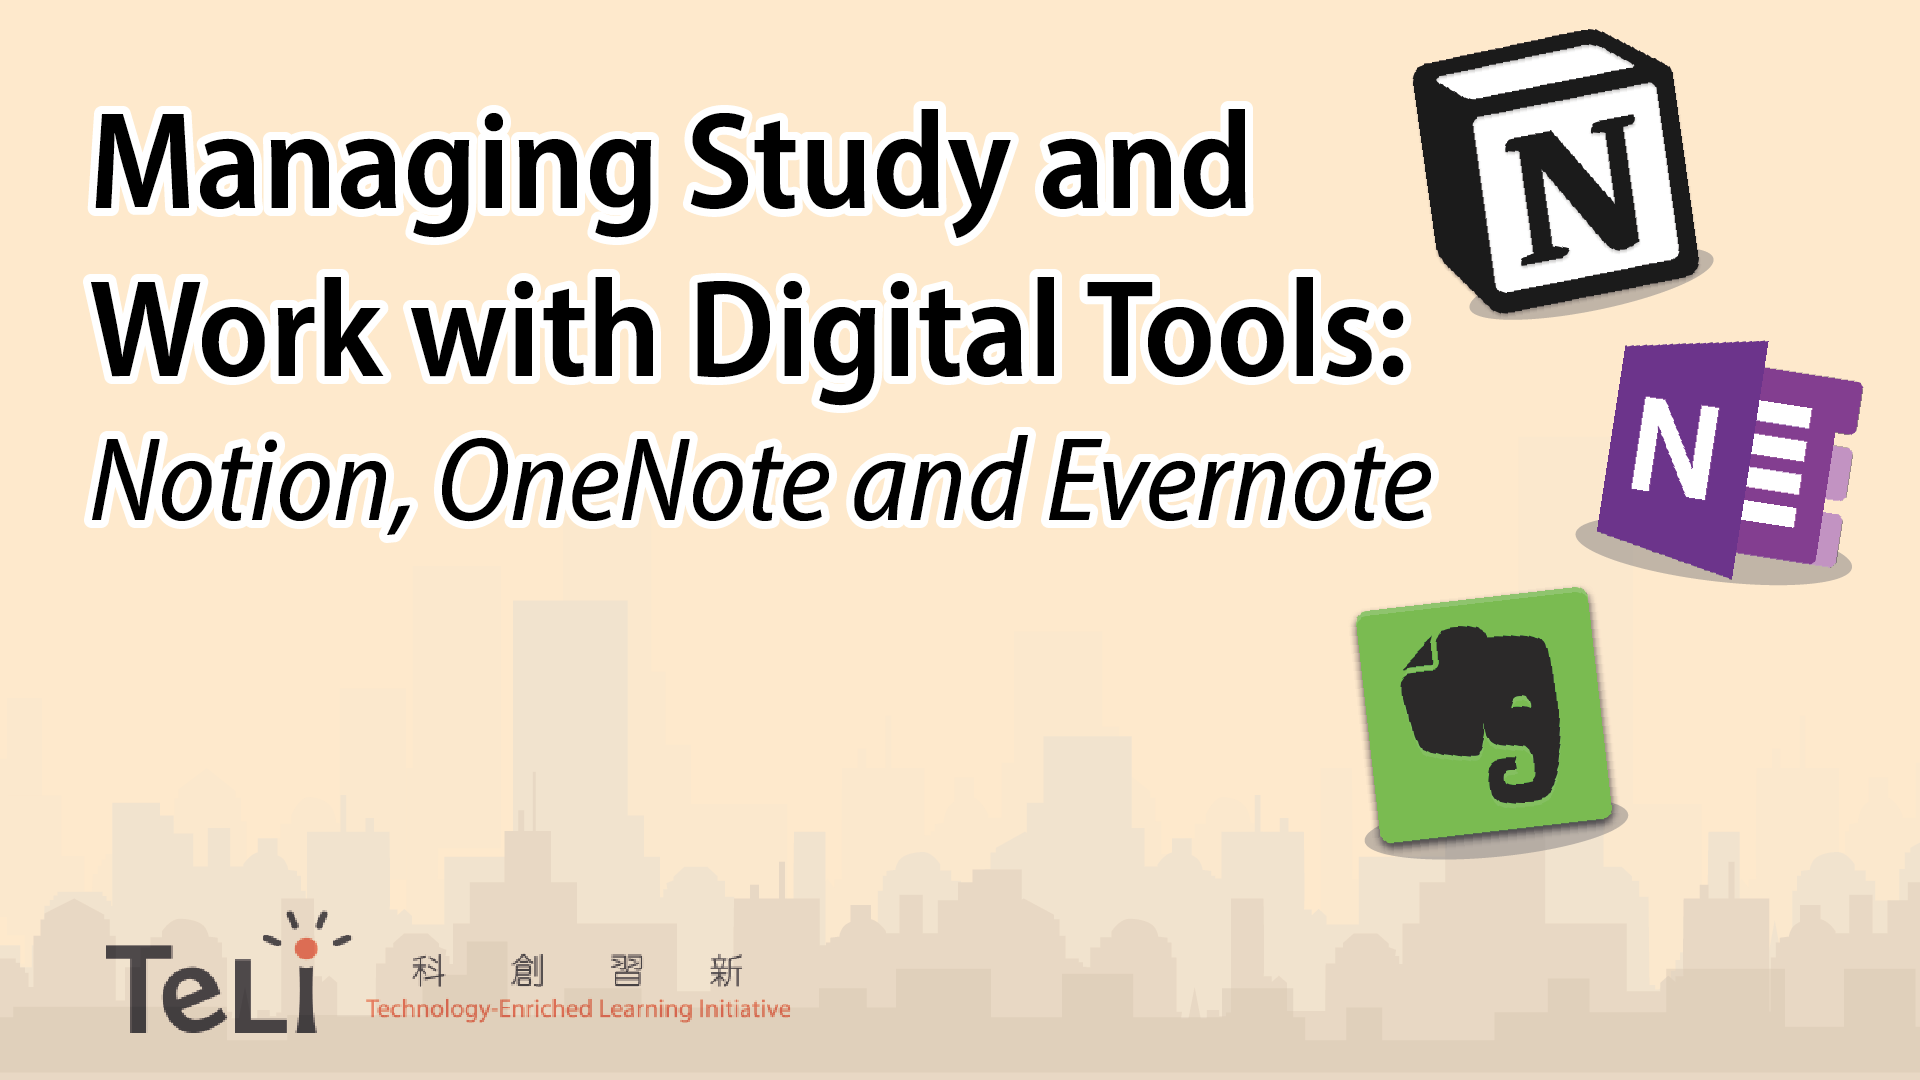 Managing Study and Work with Digital Tools: Notion, OneNote and Evernote